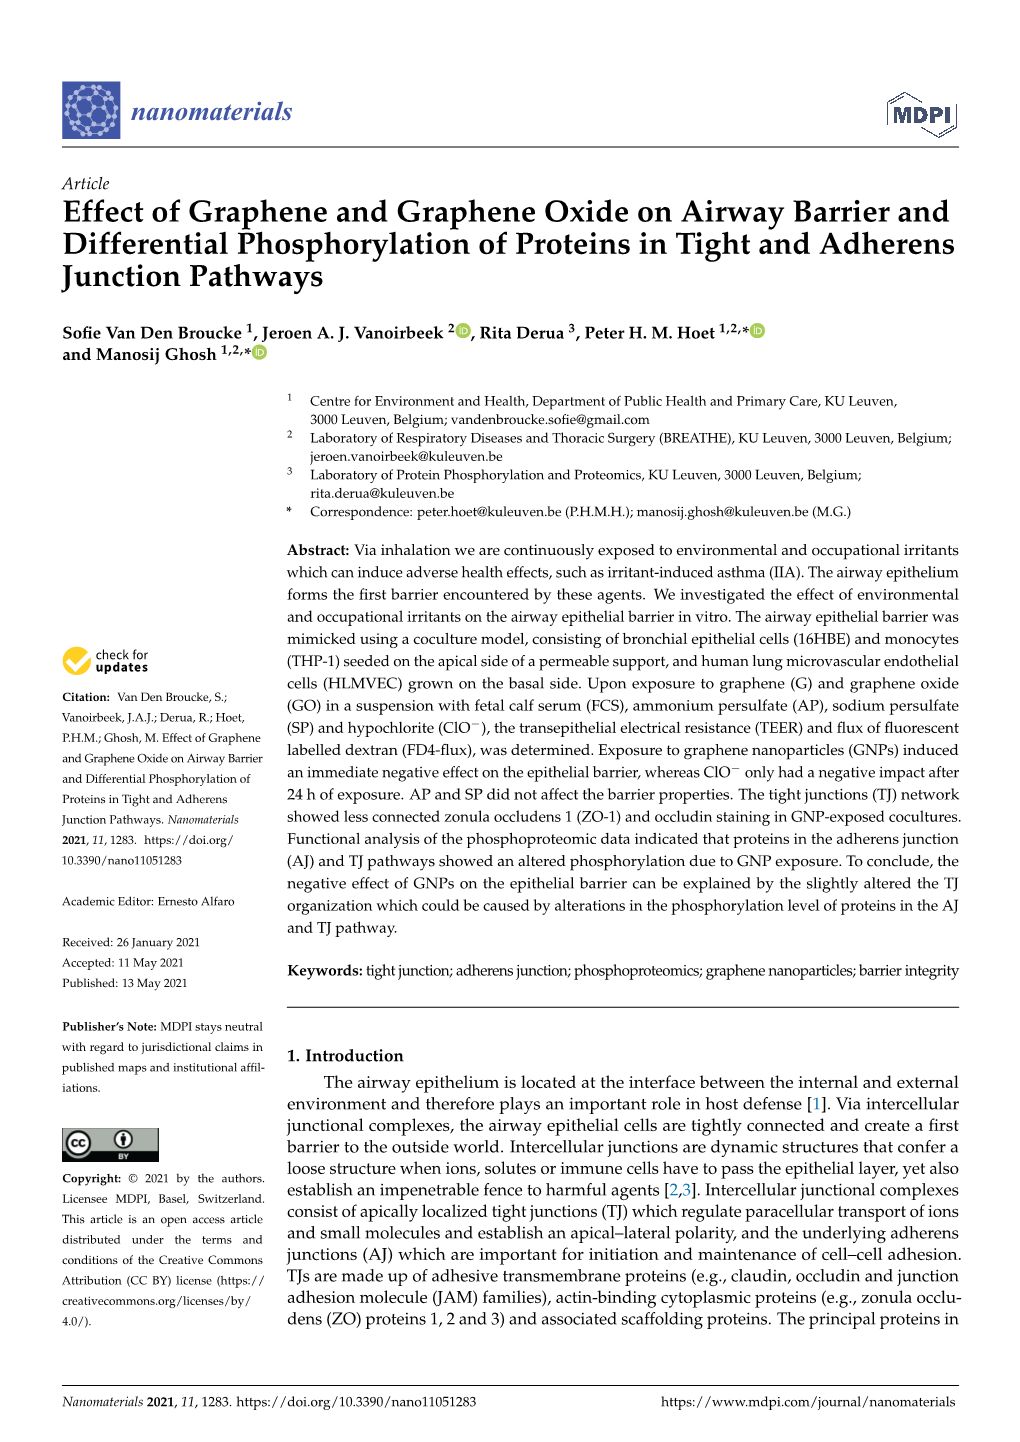 Effect of Graphene and Graphene Oxide on Airway Barrier and Differential Phosphorylation of Proteins in Tight and Adherens Junction Pathways